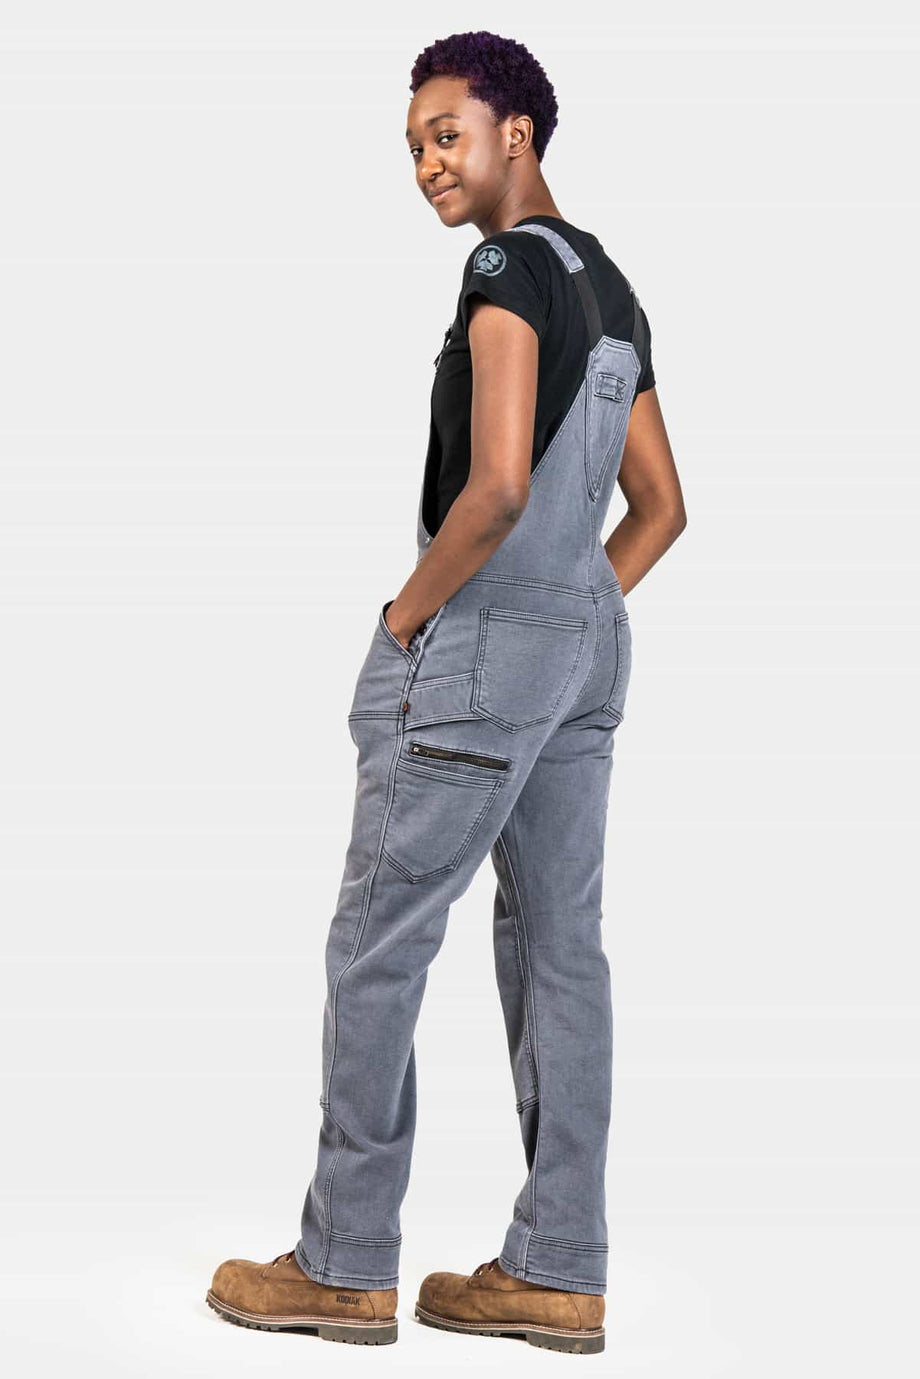 Freshley Overalls For Women in Grey Thermal Denim